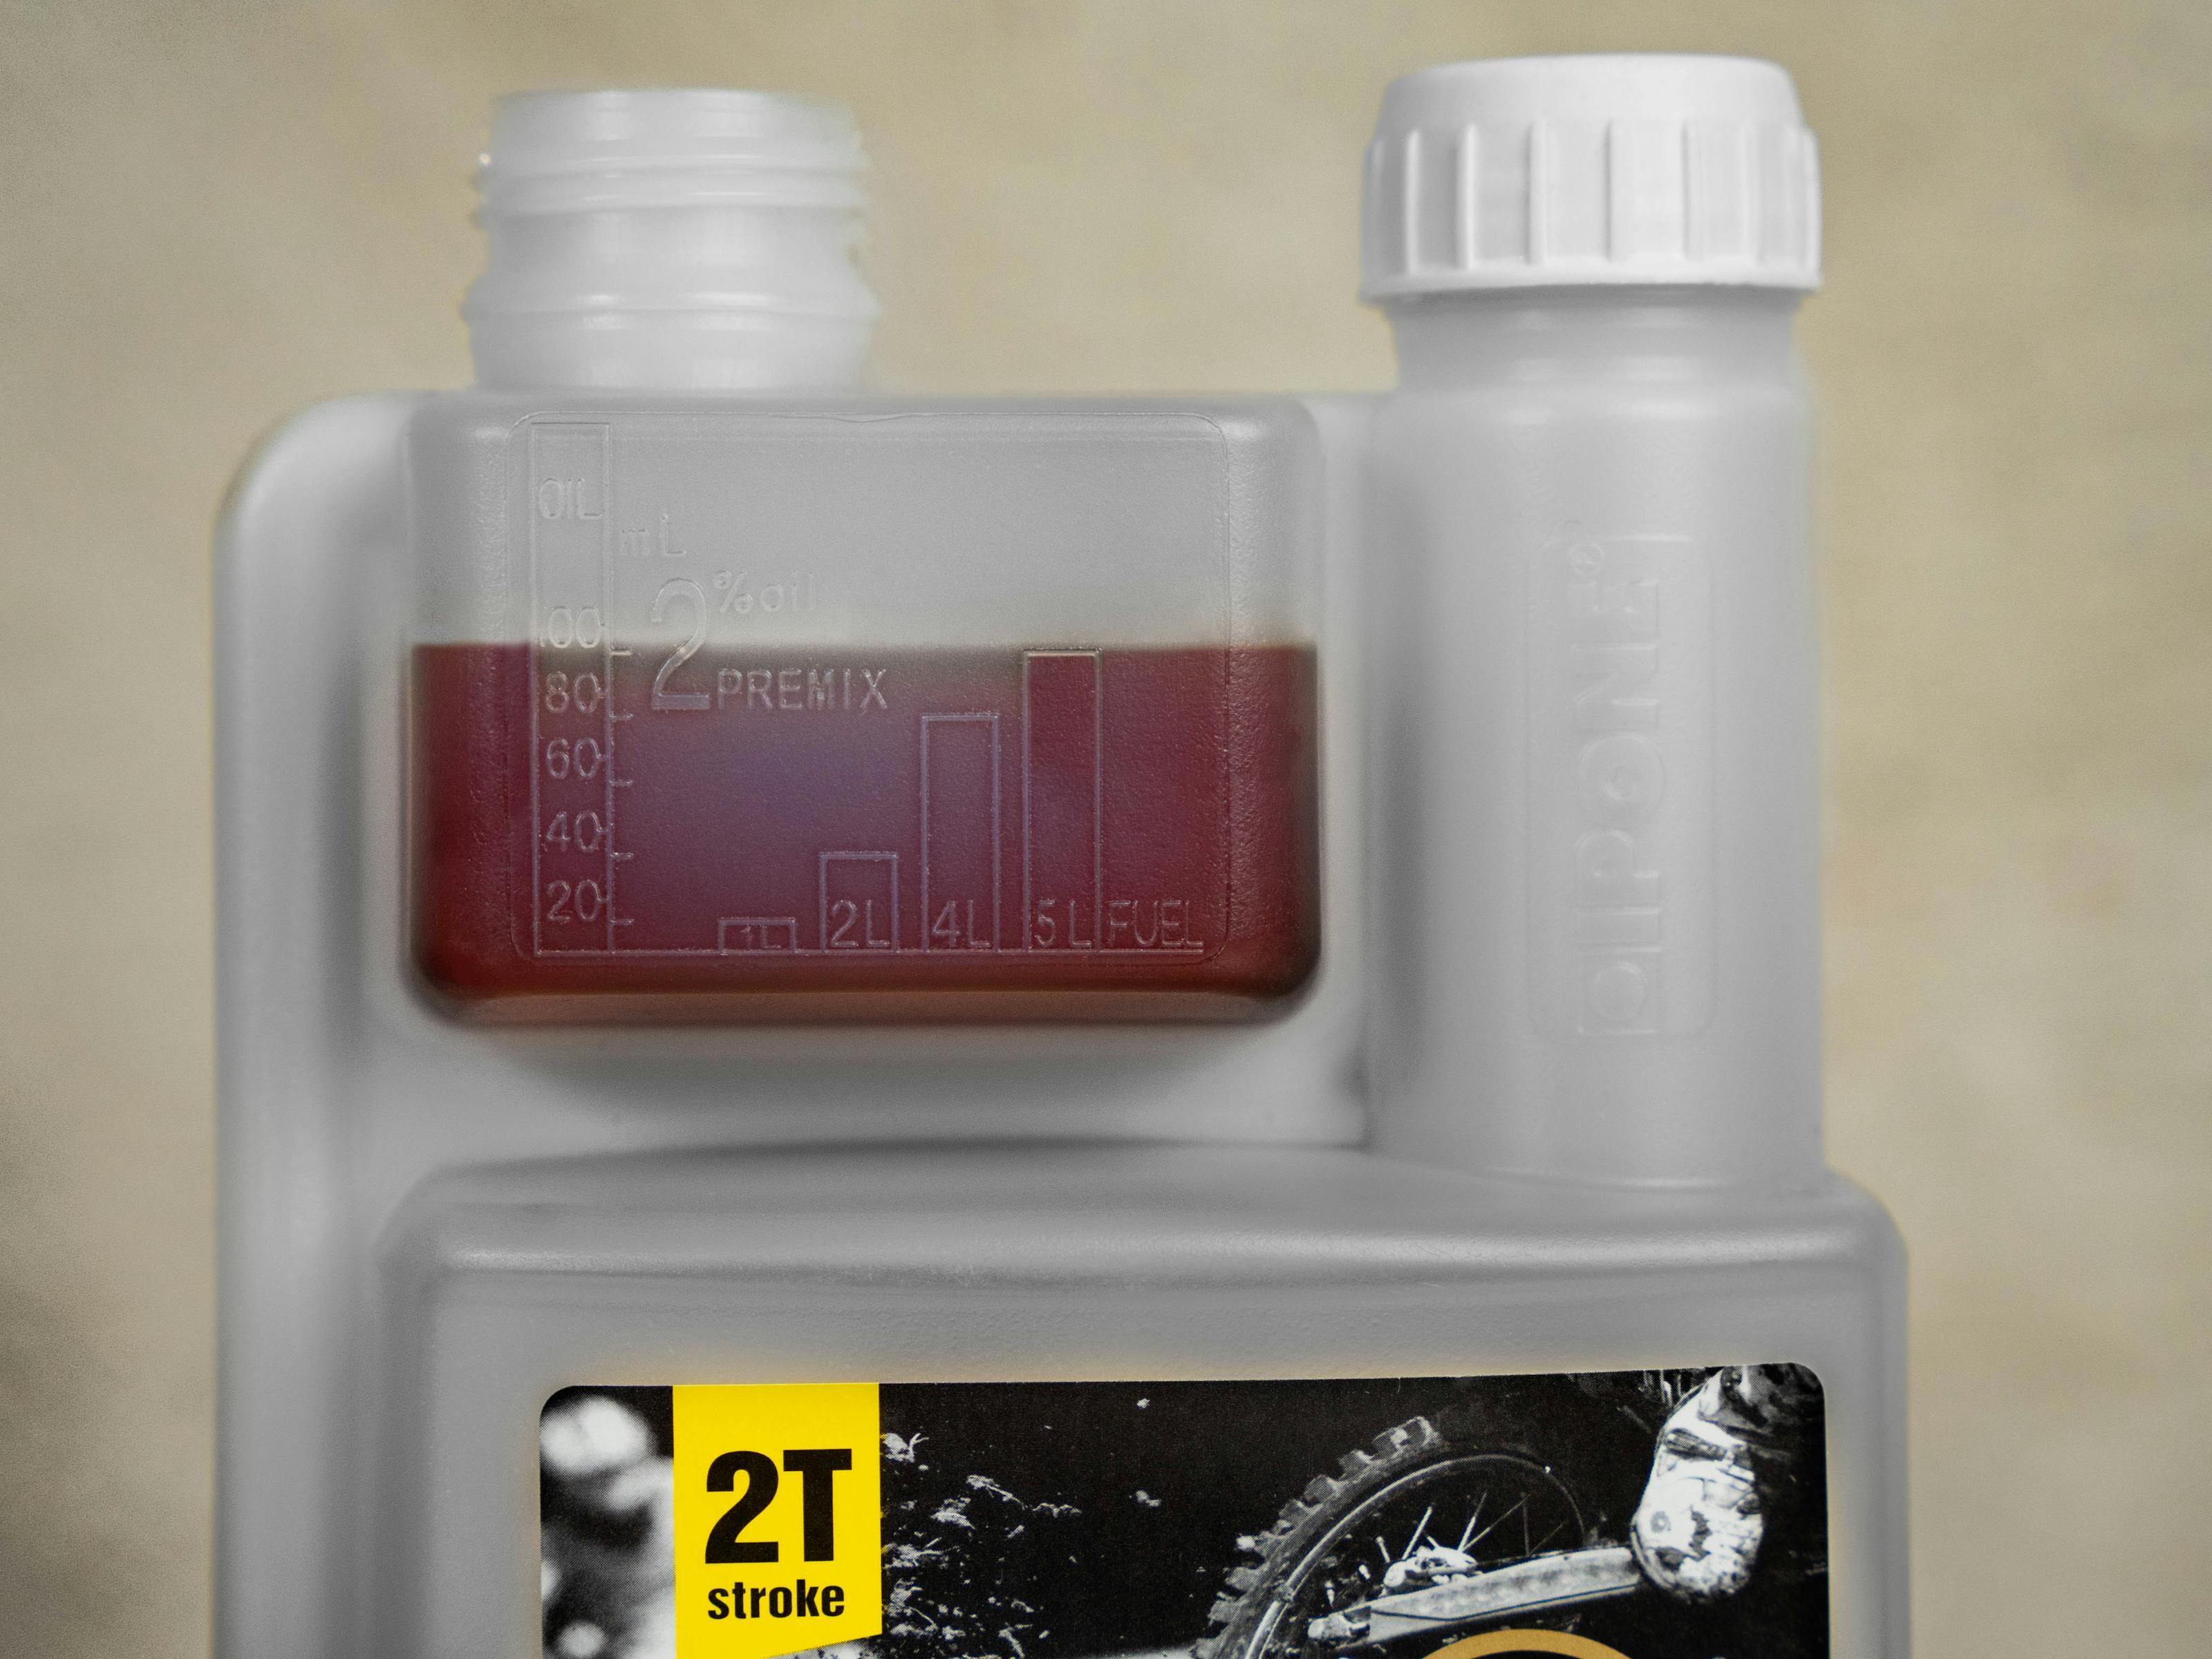 Easily and accurately mix the correct amount of oil in the fuel of any 2- stroke